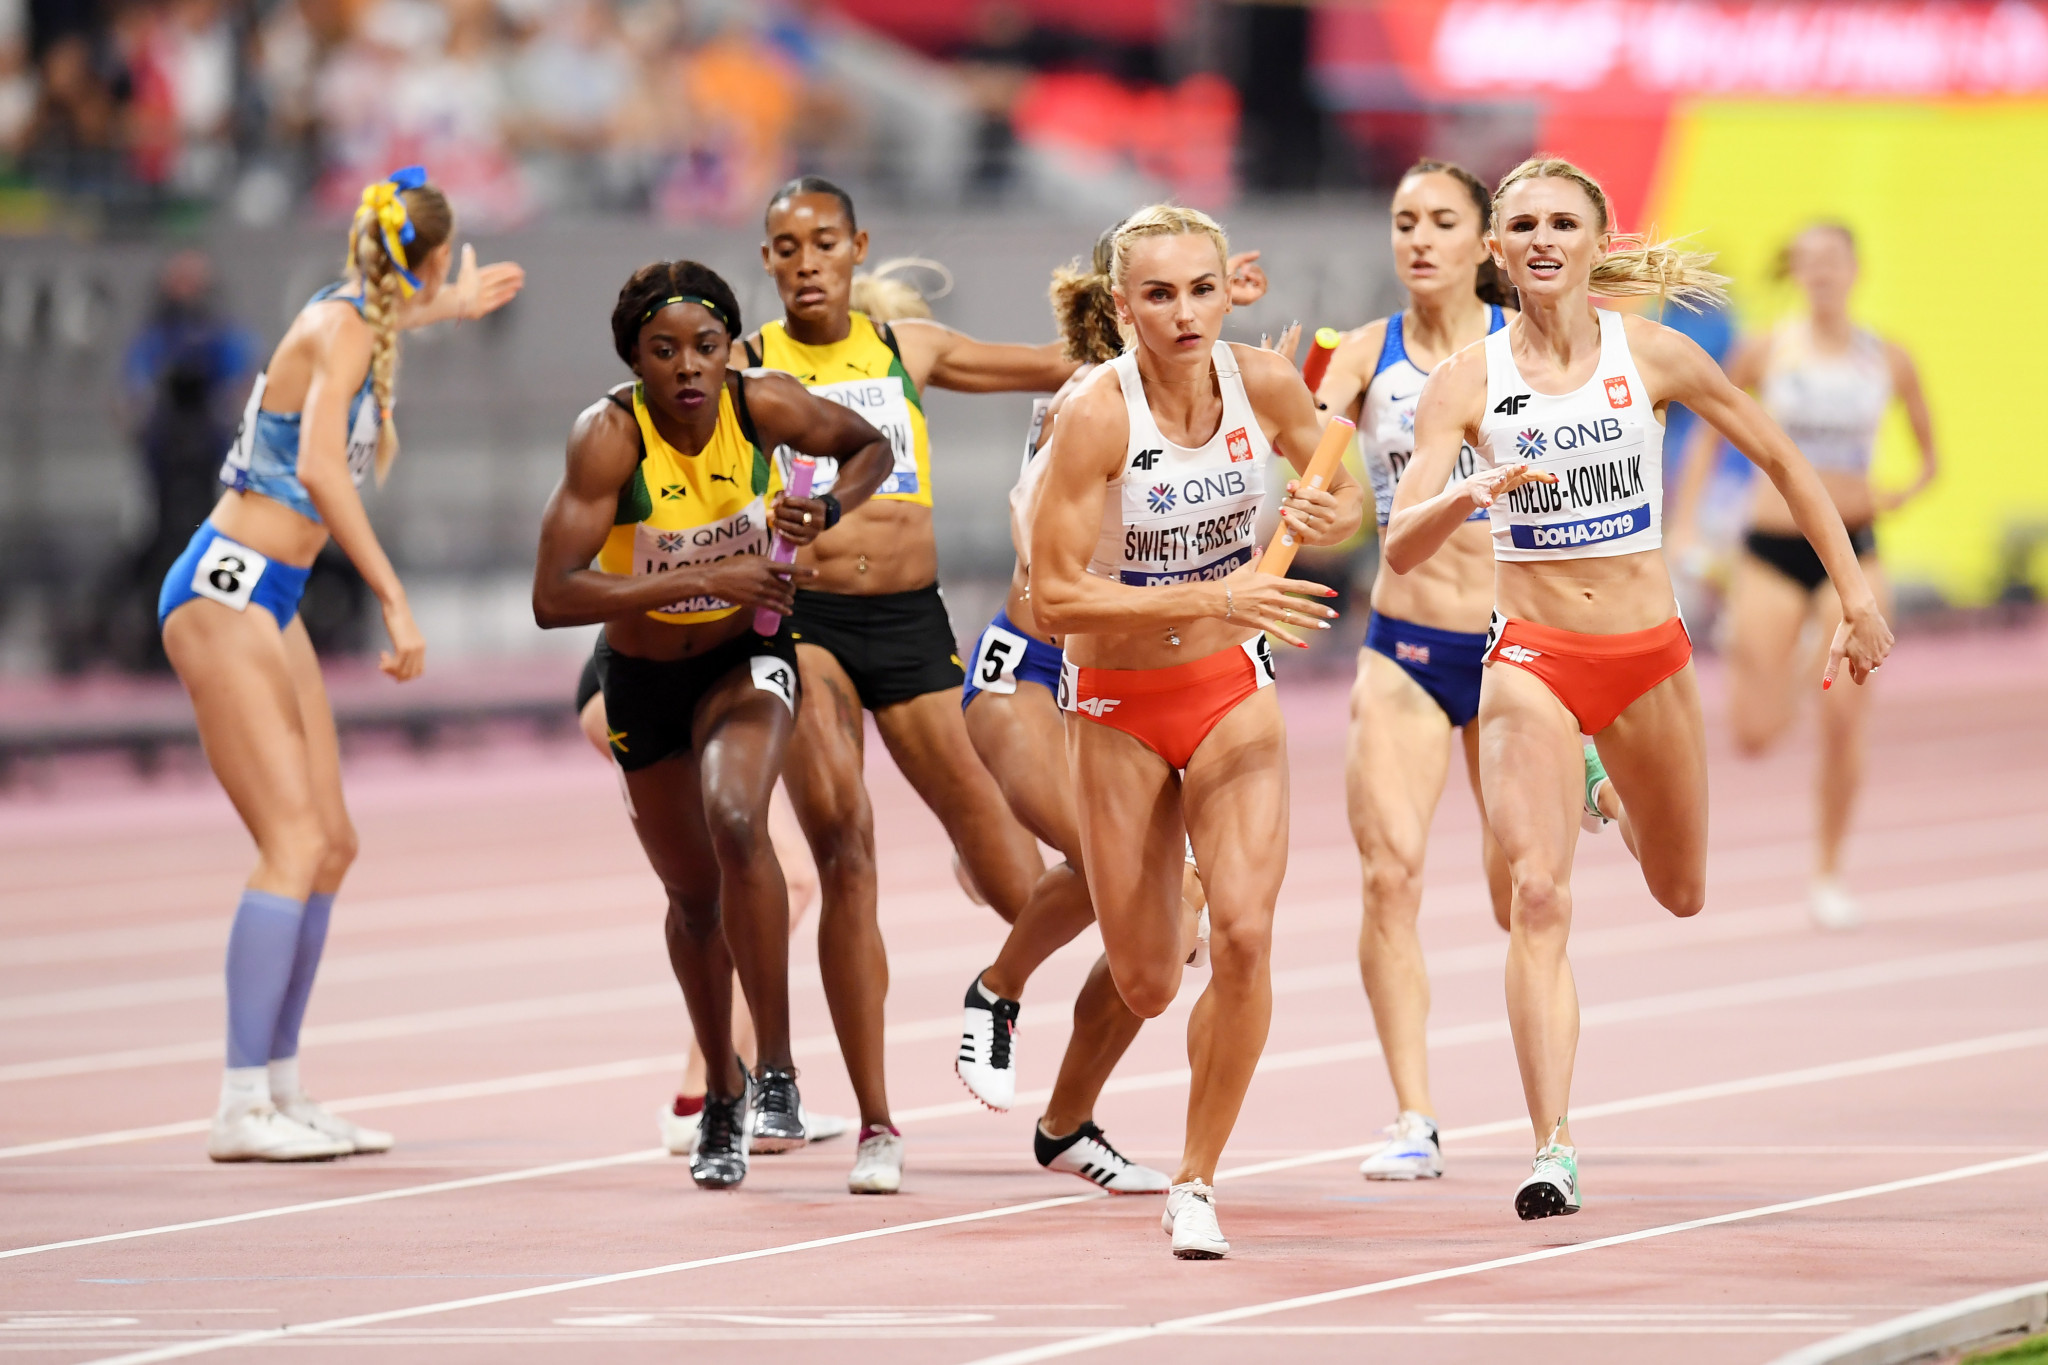 World Athletics revealed it is open to rescheduling the World Championships to accommodate the Olympic Games ©Getty Images